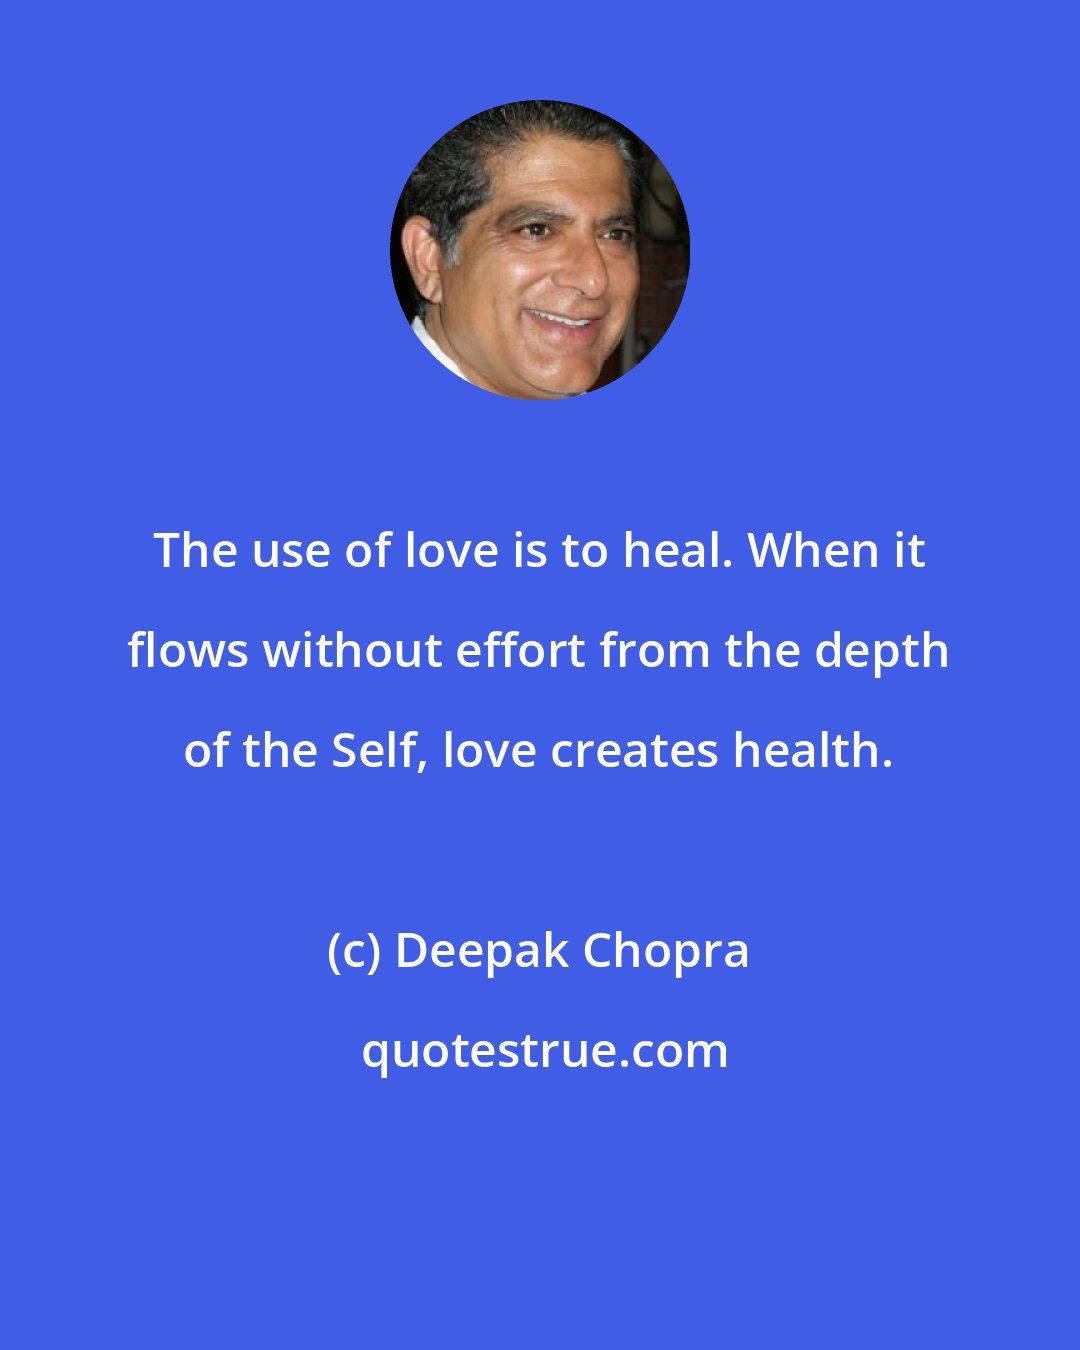 Deepak Chopra: The use of love is to heal. When it flows without effort from the depth of the Self, love creates health.